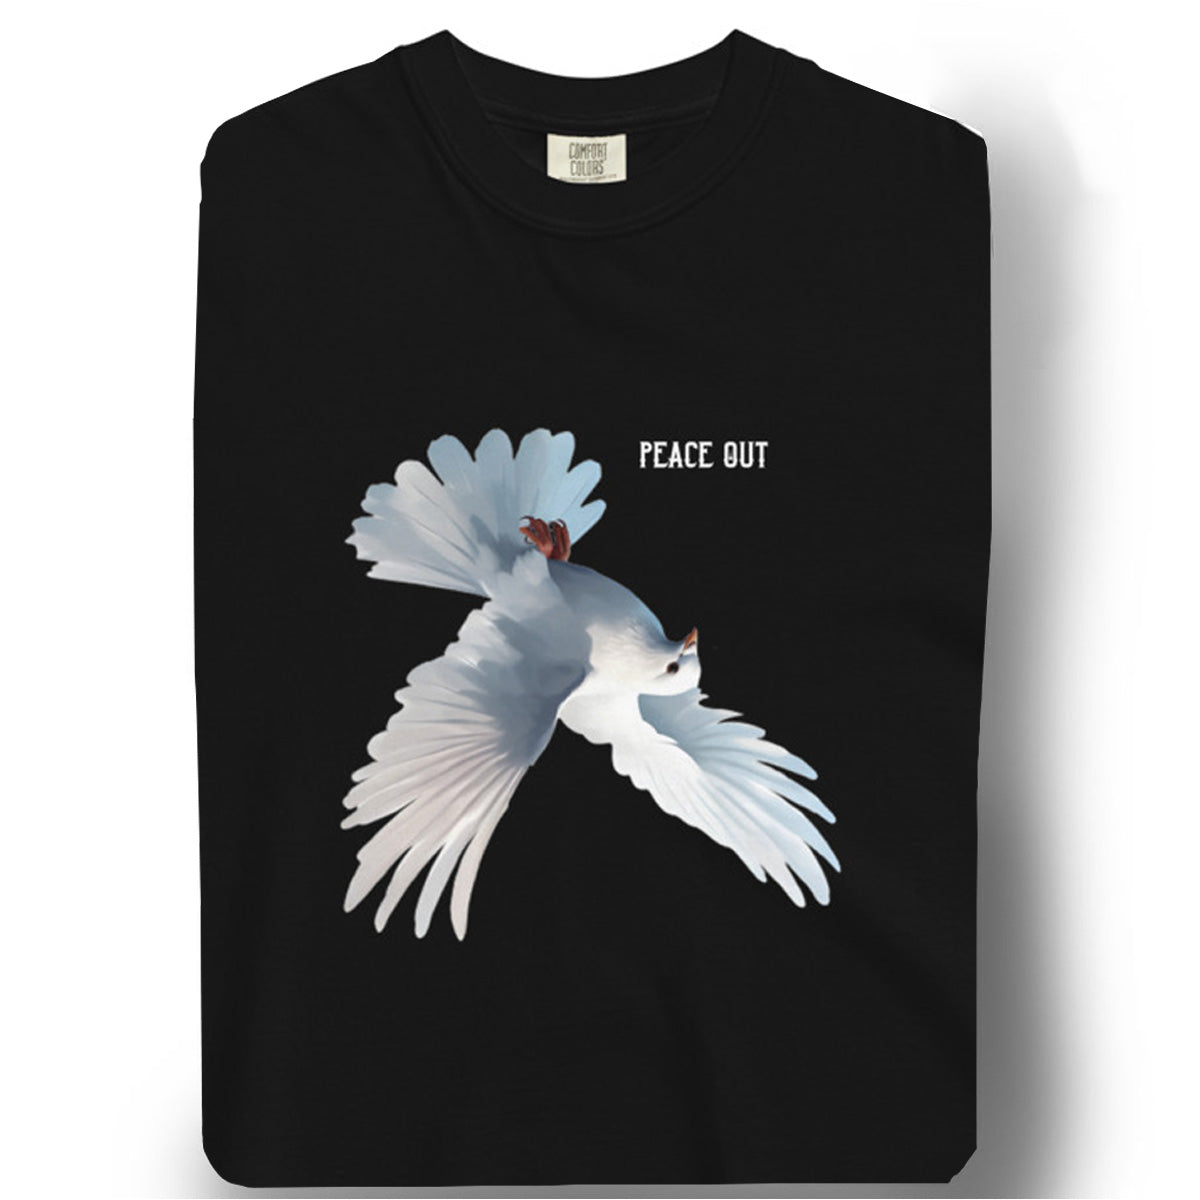 PEACE OUT!! UPSIDE DOWN - Heavy Garment-Dyed Tee